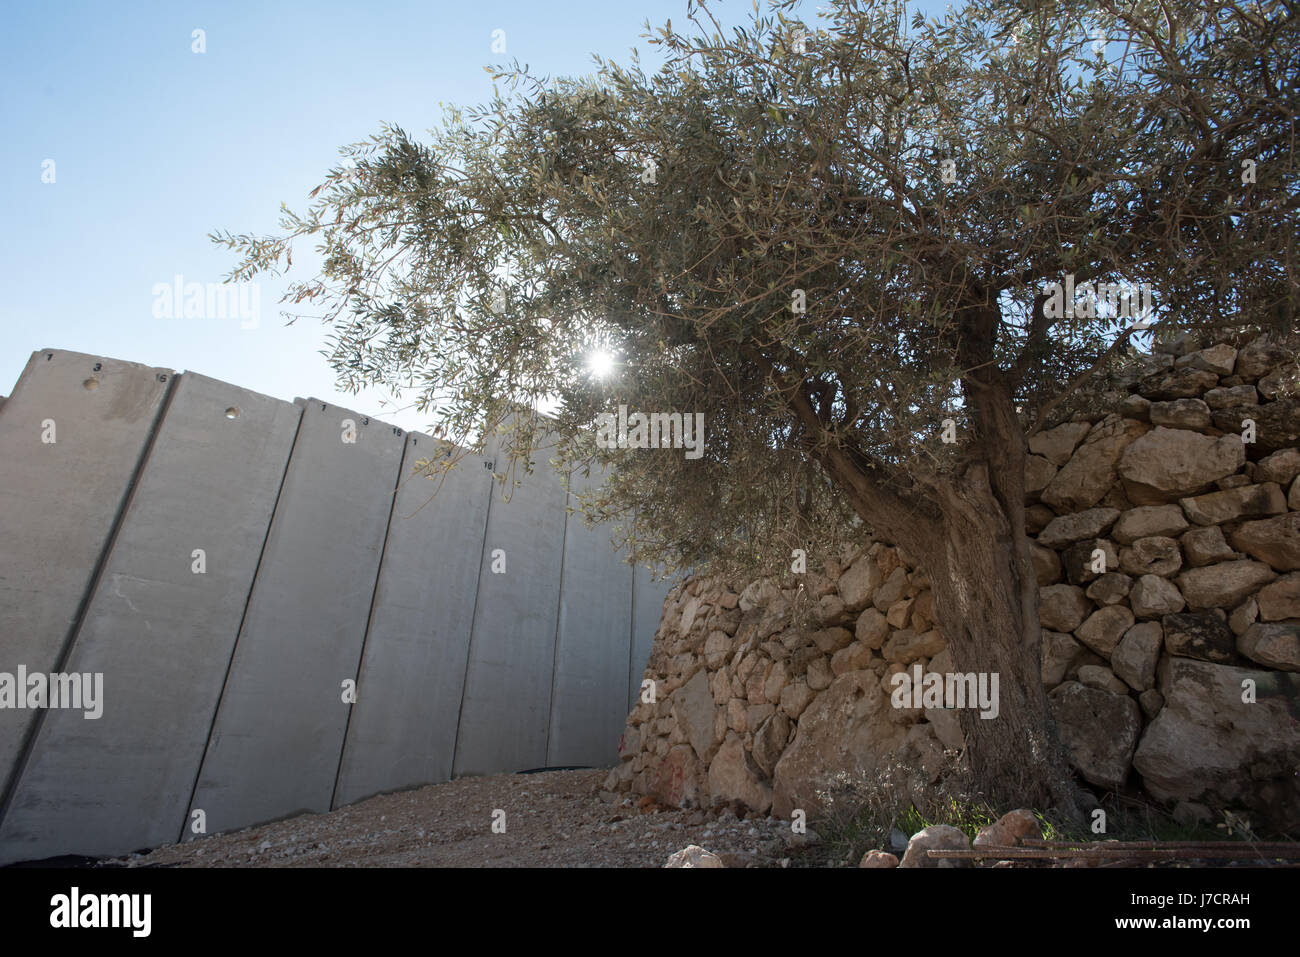 The Israeli Separation Wall divides olive groves belonging to the West Bank village of Beit Jala, December 30, 2016. Stock Photo